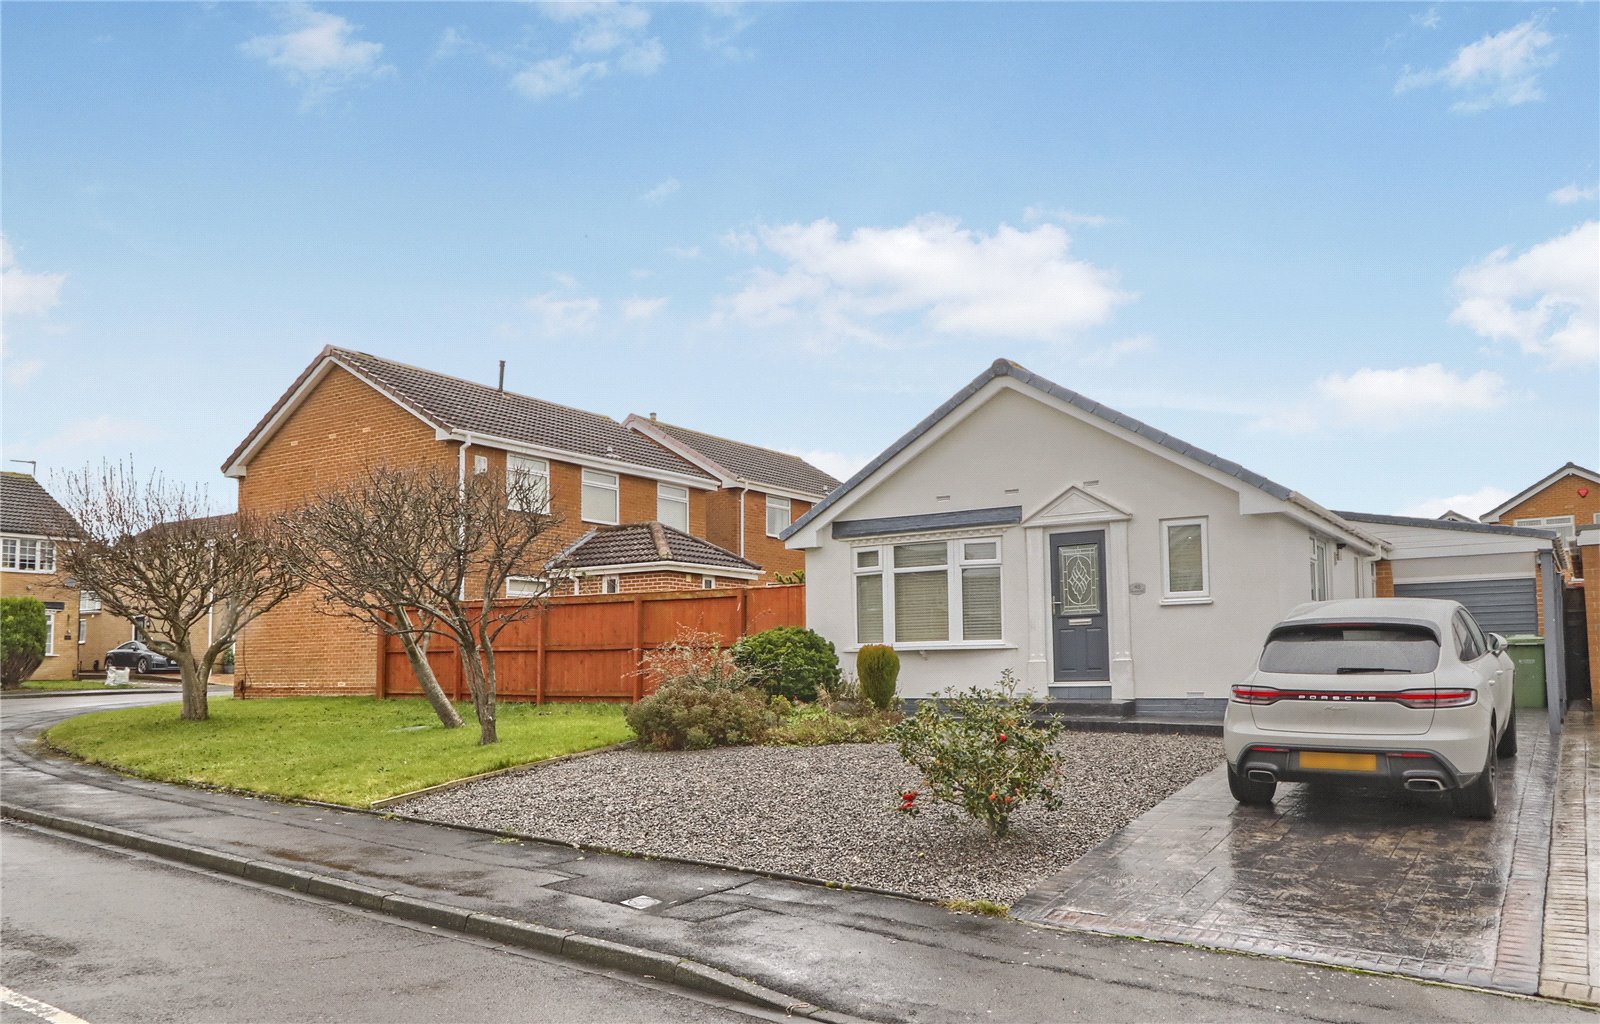 2 bed bungalow for sale in Norwood Close, Stockton-on-Tees 1